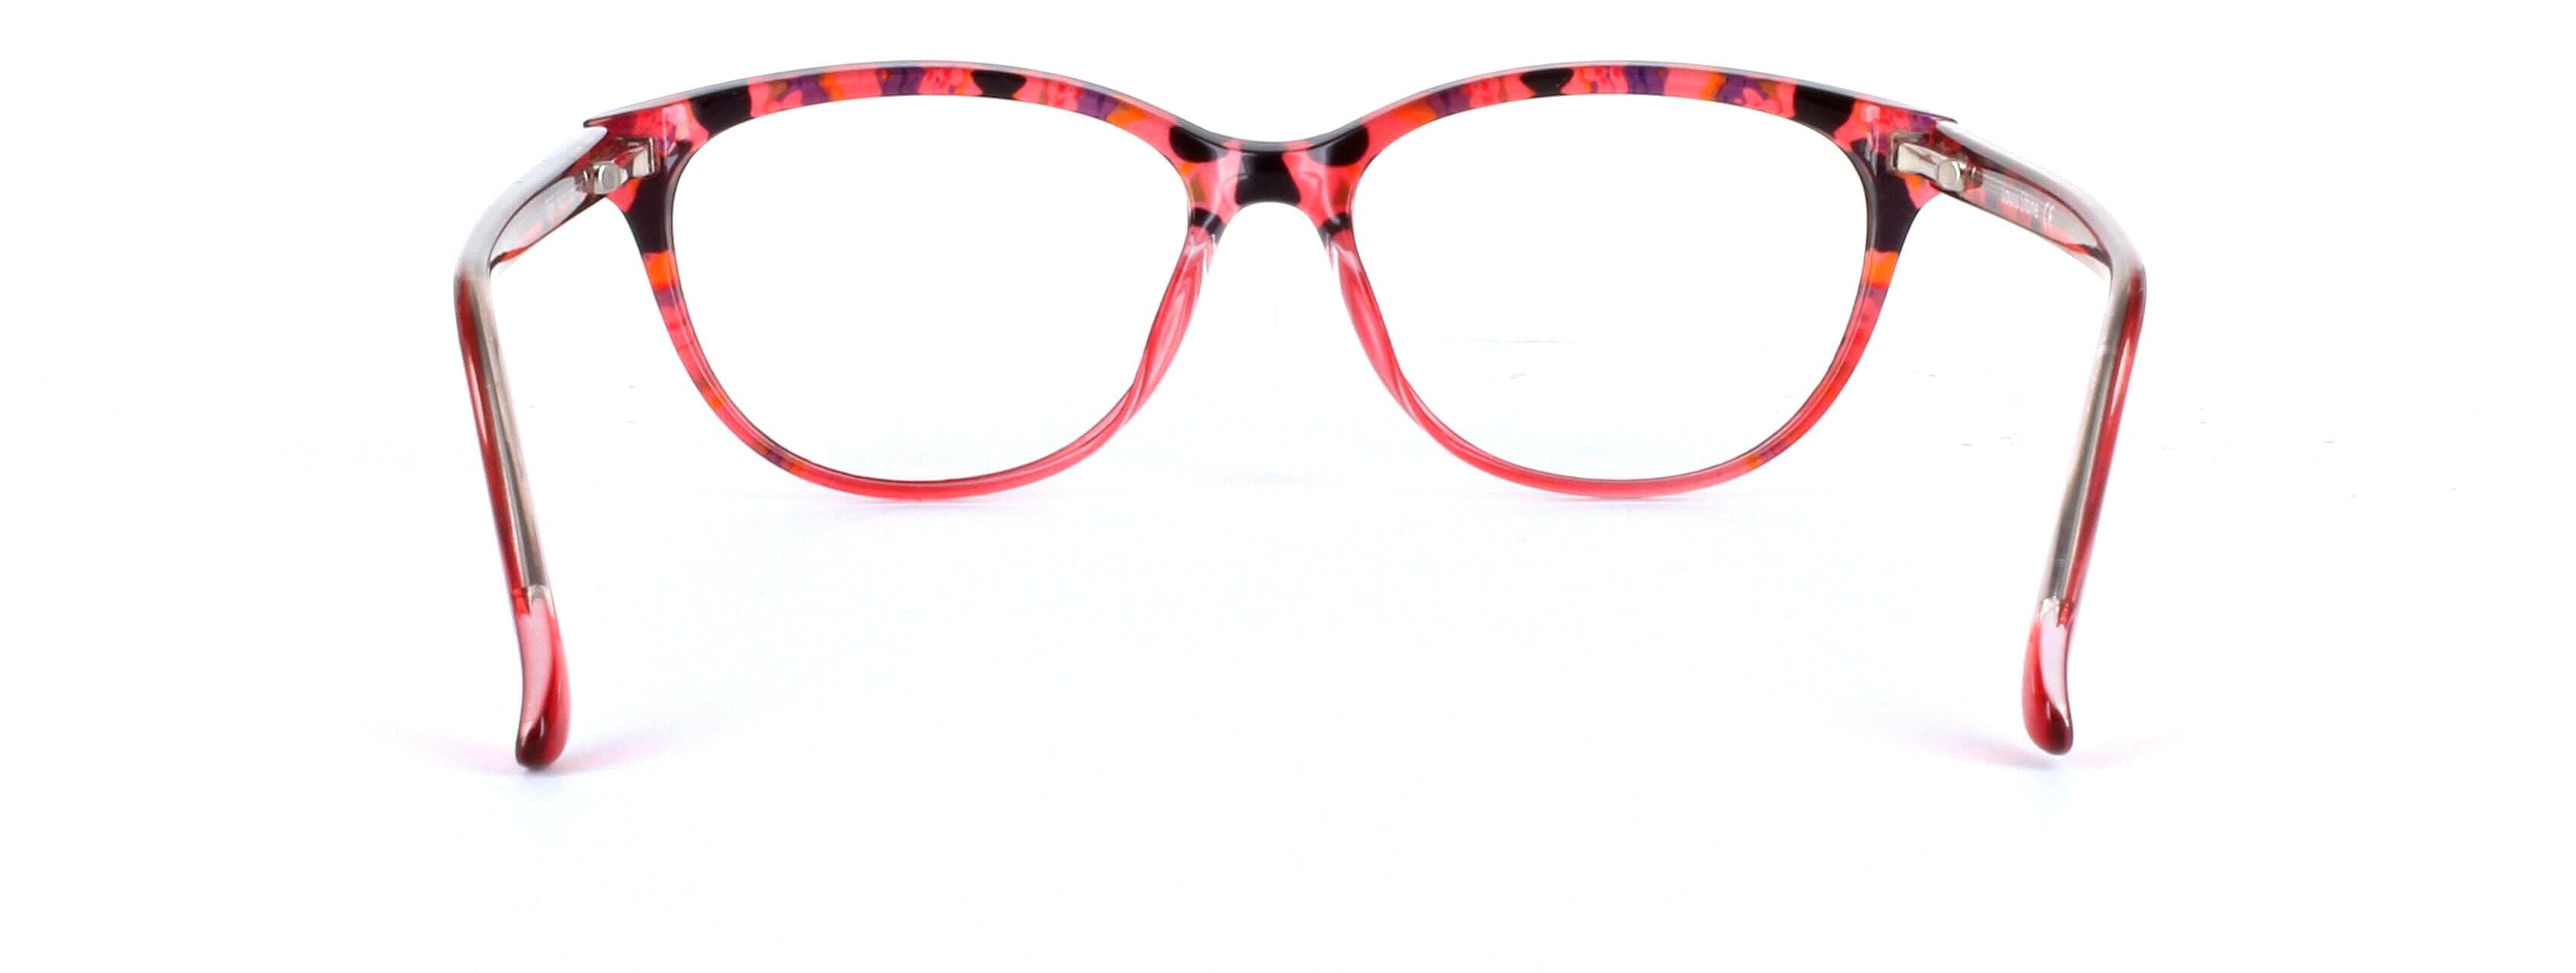 Dolores Red Full Rim Oval Round Plastic Glasses - Image View 3